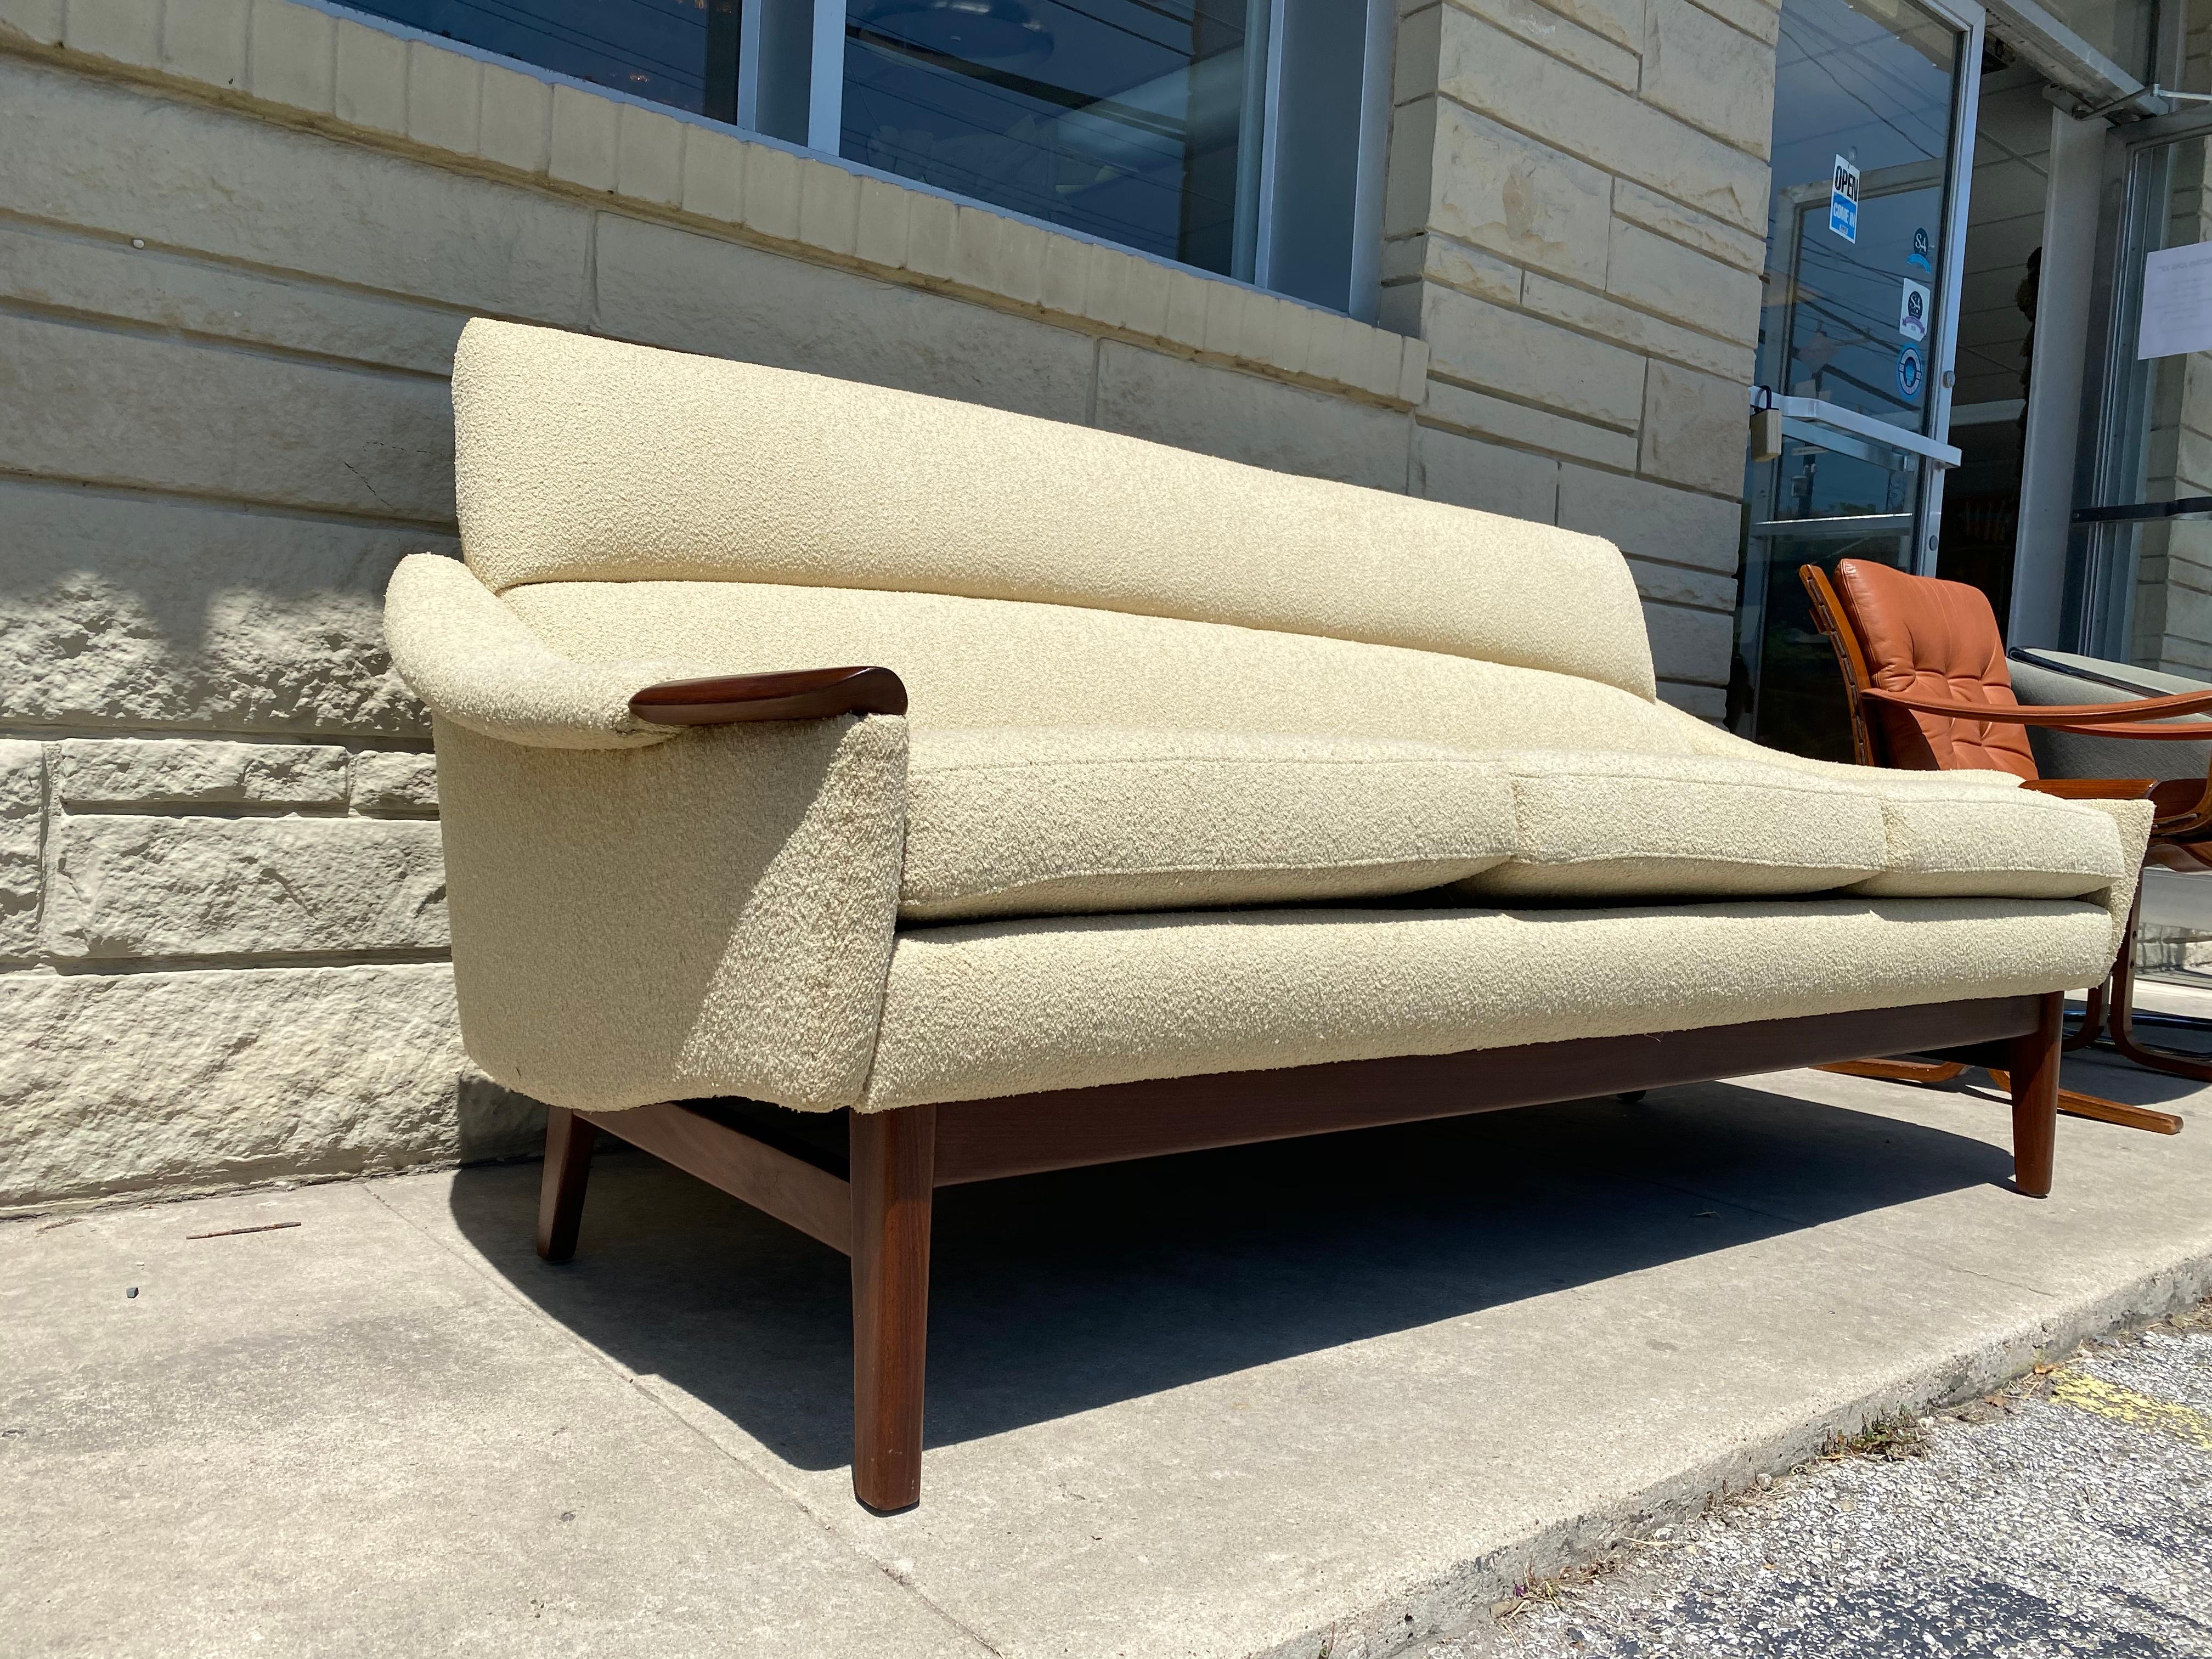 This wonderfully unique sofa was created by R. Huber & Co., and is in overall good condition. Walnut wood details. Cream colored nubby bouclé upholstery. Wear consistent to age and use.
circa 1960s. Canada.
Dimensions:
30